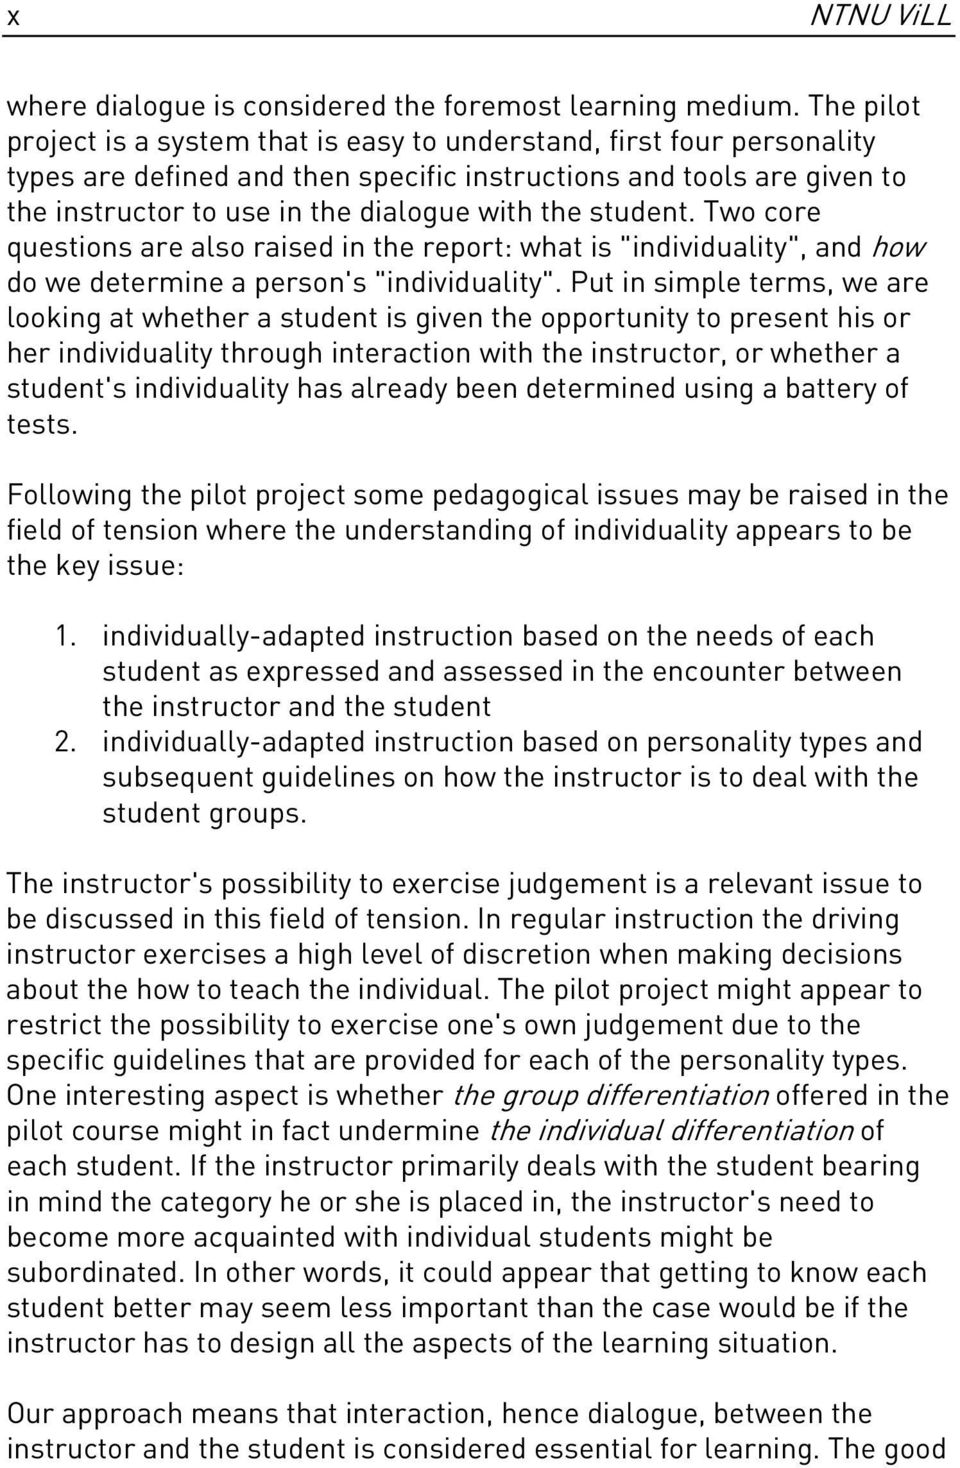 student. Two core questions are also raised in the report: what is "individuality", and how do we determine a person's "individuality".